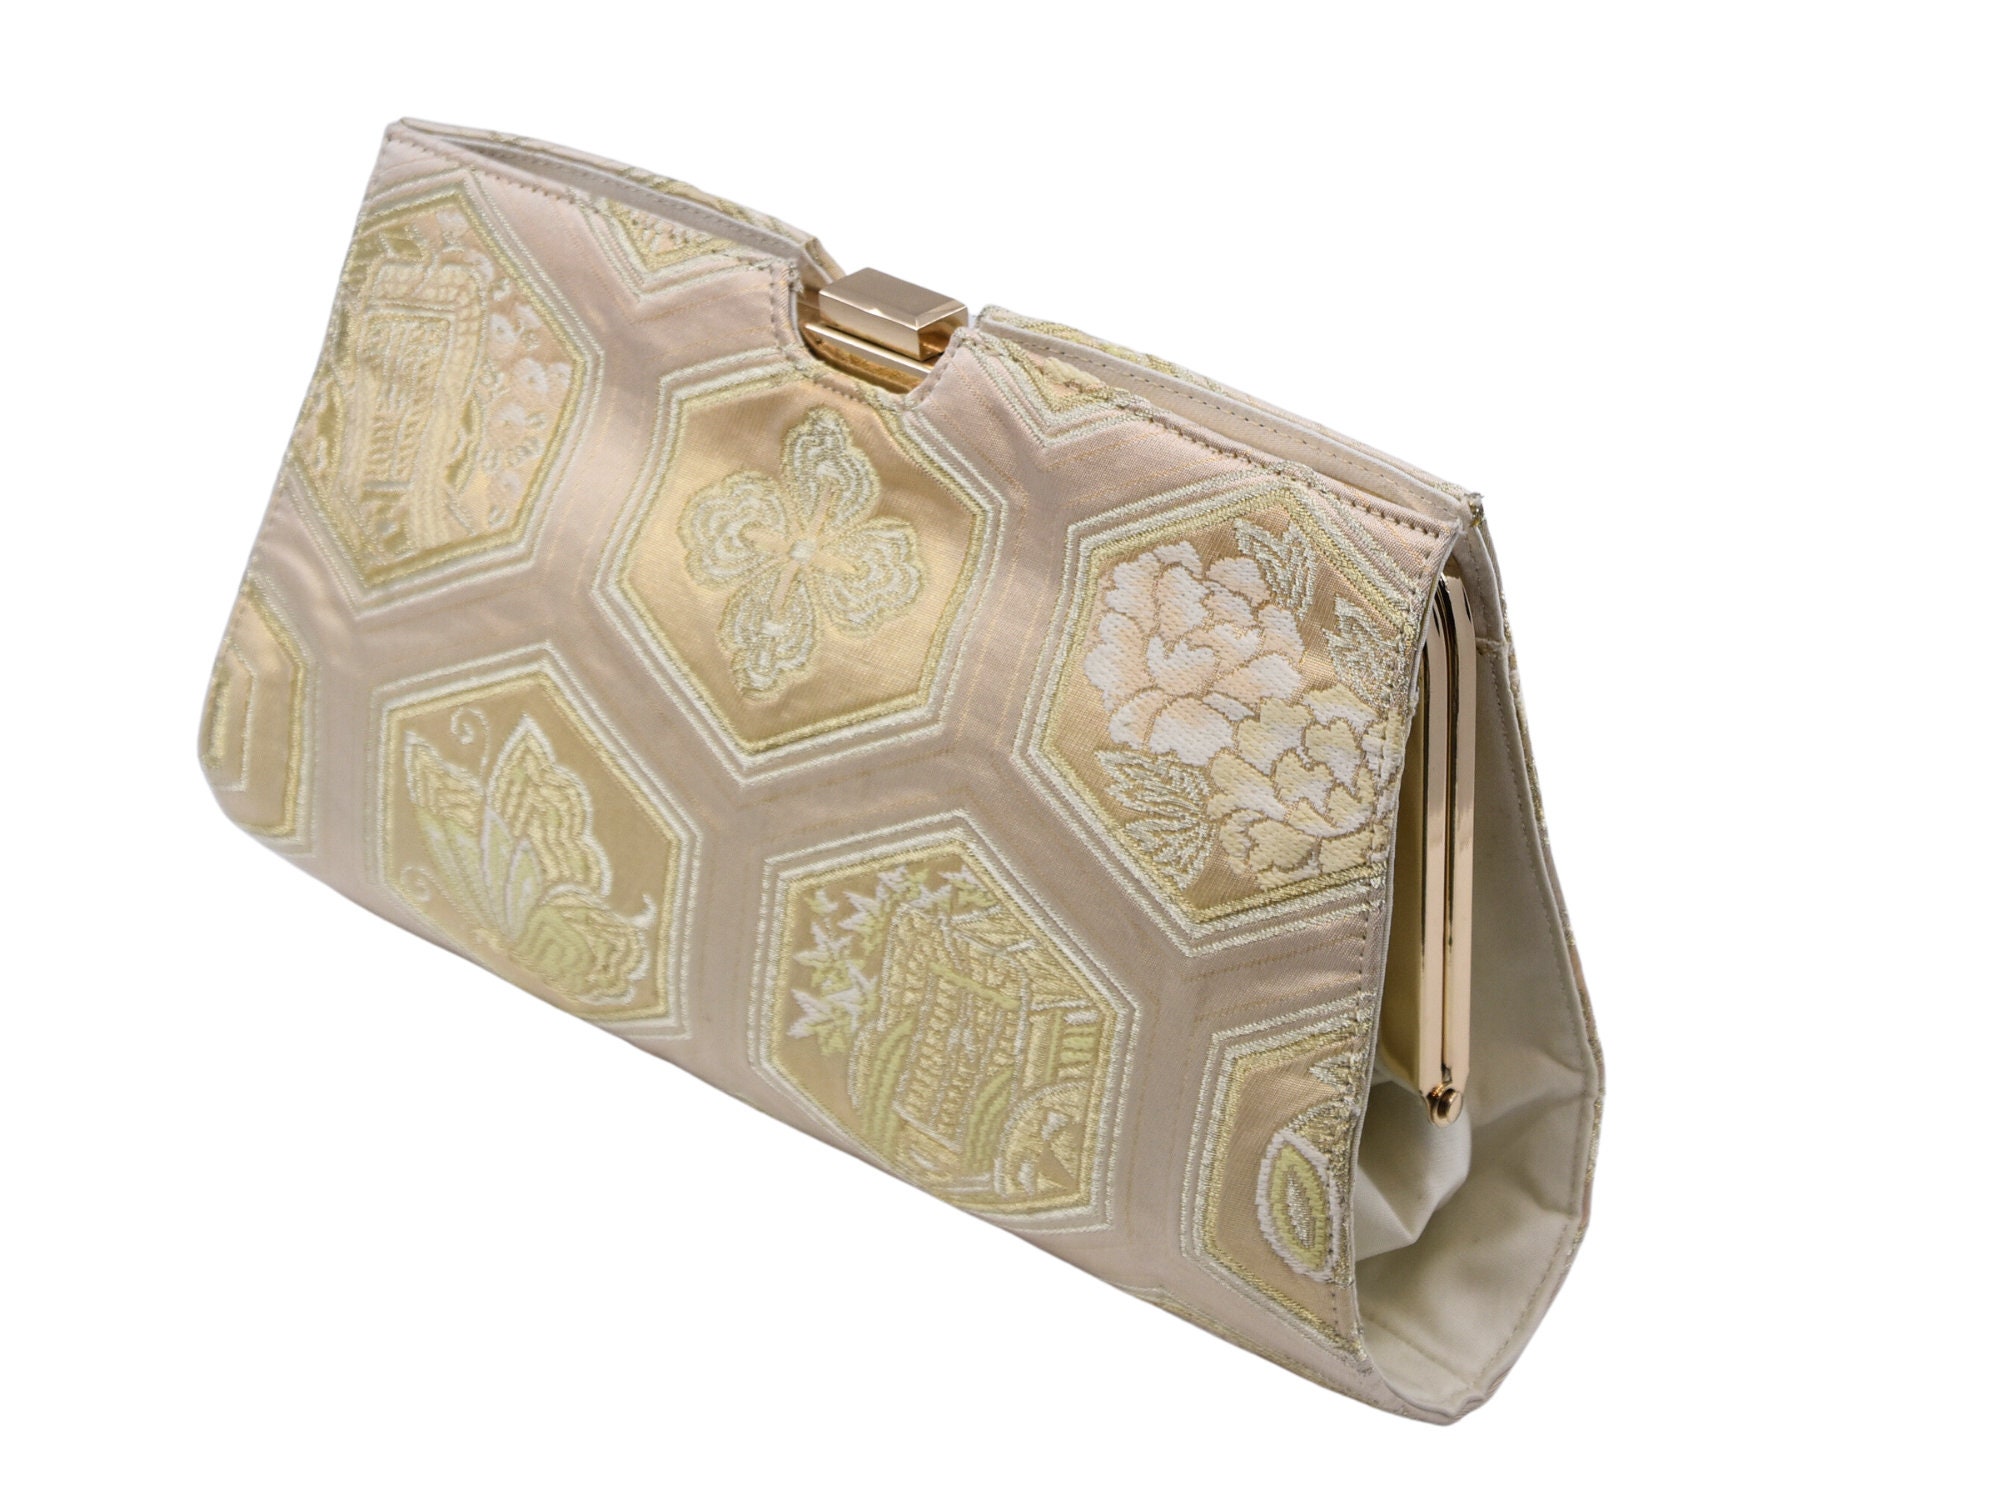 Handbag With Floral Embroidered Patching as a Return Gift | Shaabee Return  Gifts